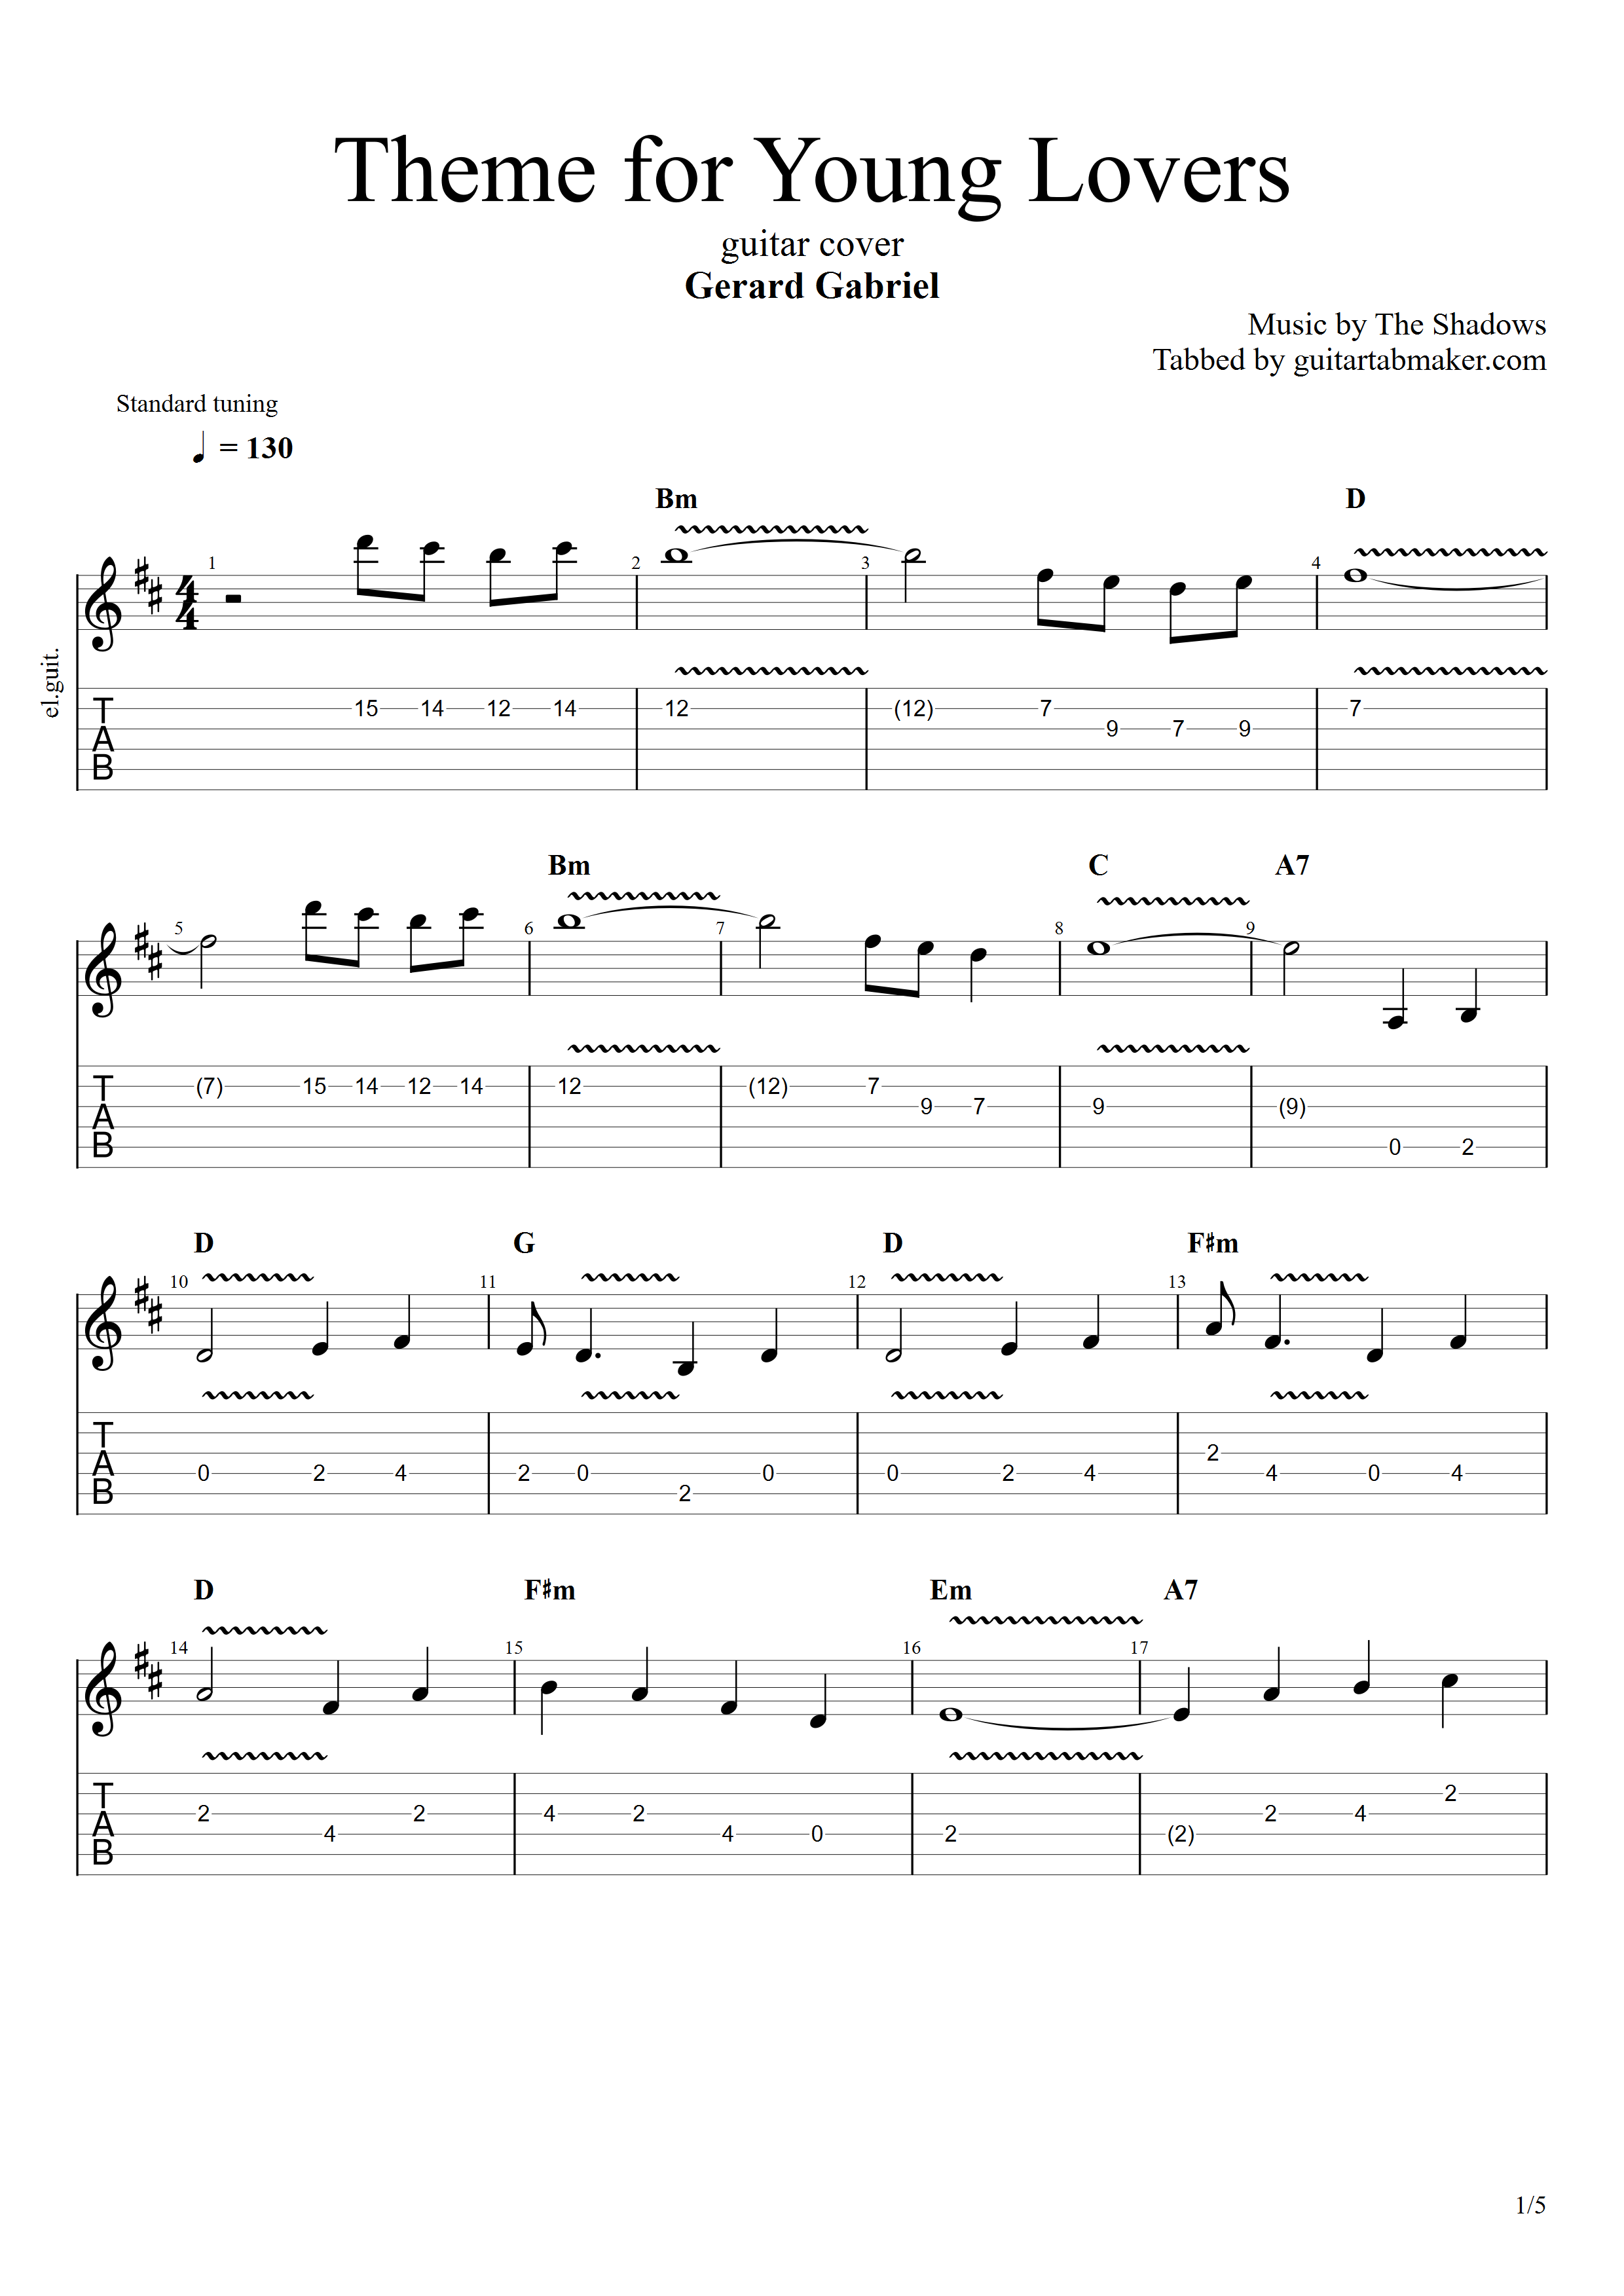 Theme for Young Lovers guitar TAB